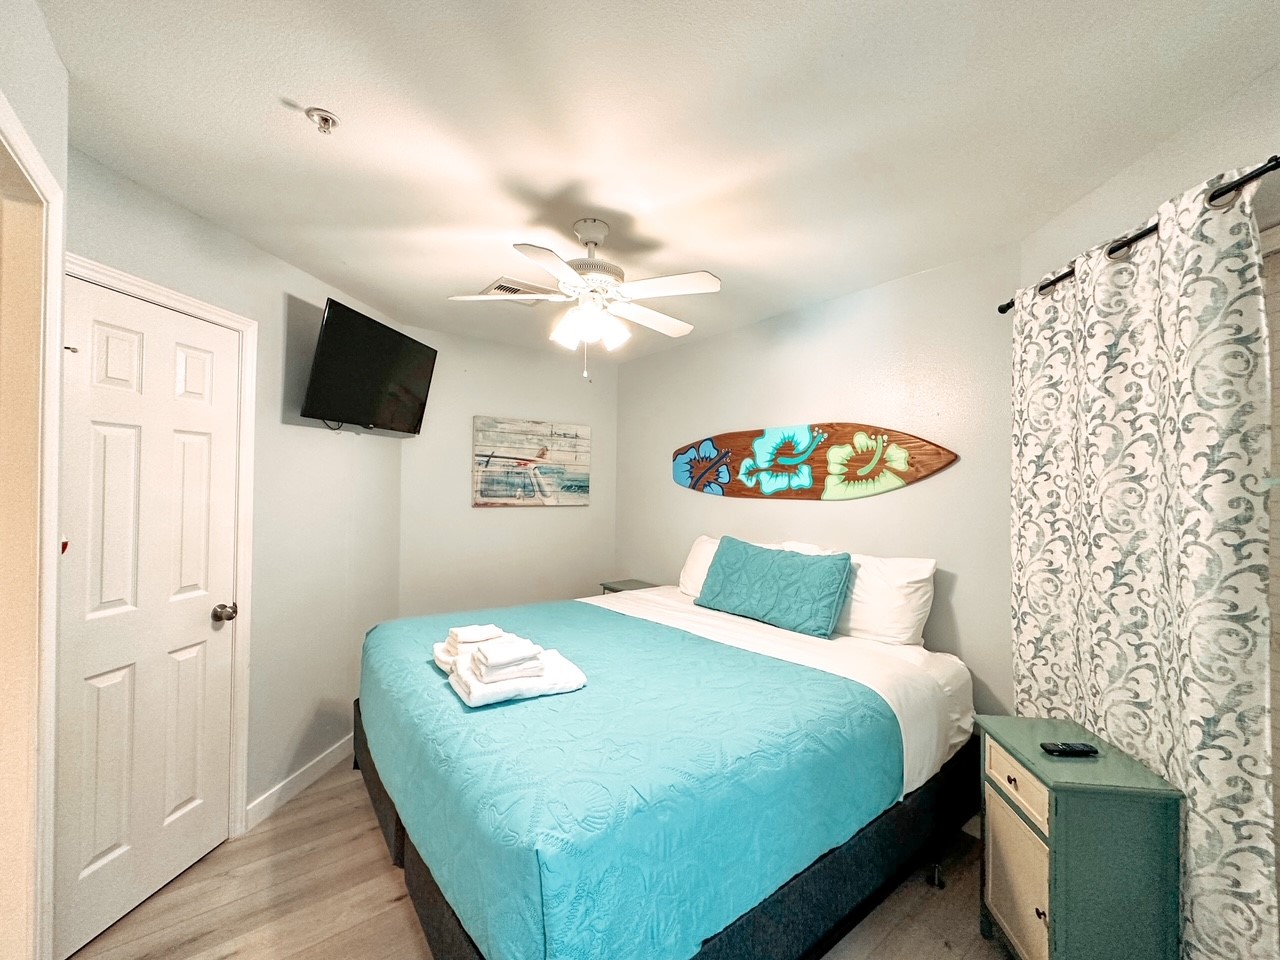 There's a comfy king size bed and DirecTV for your relaxation and enjoyment.